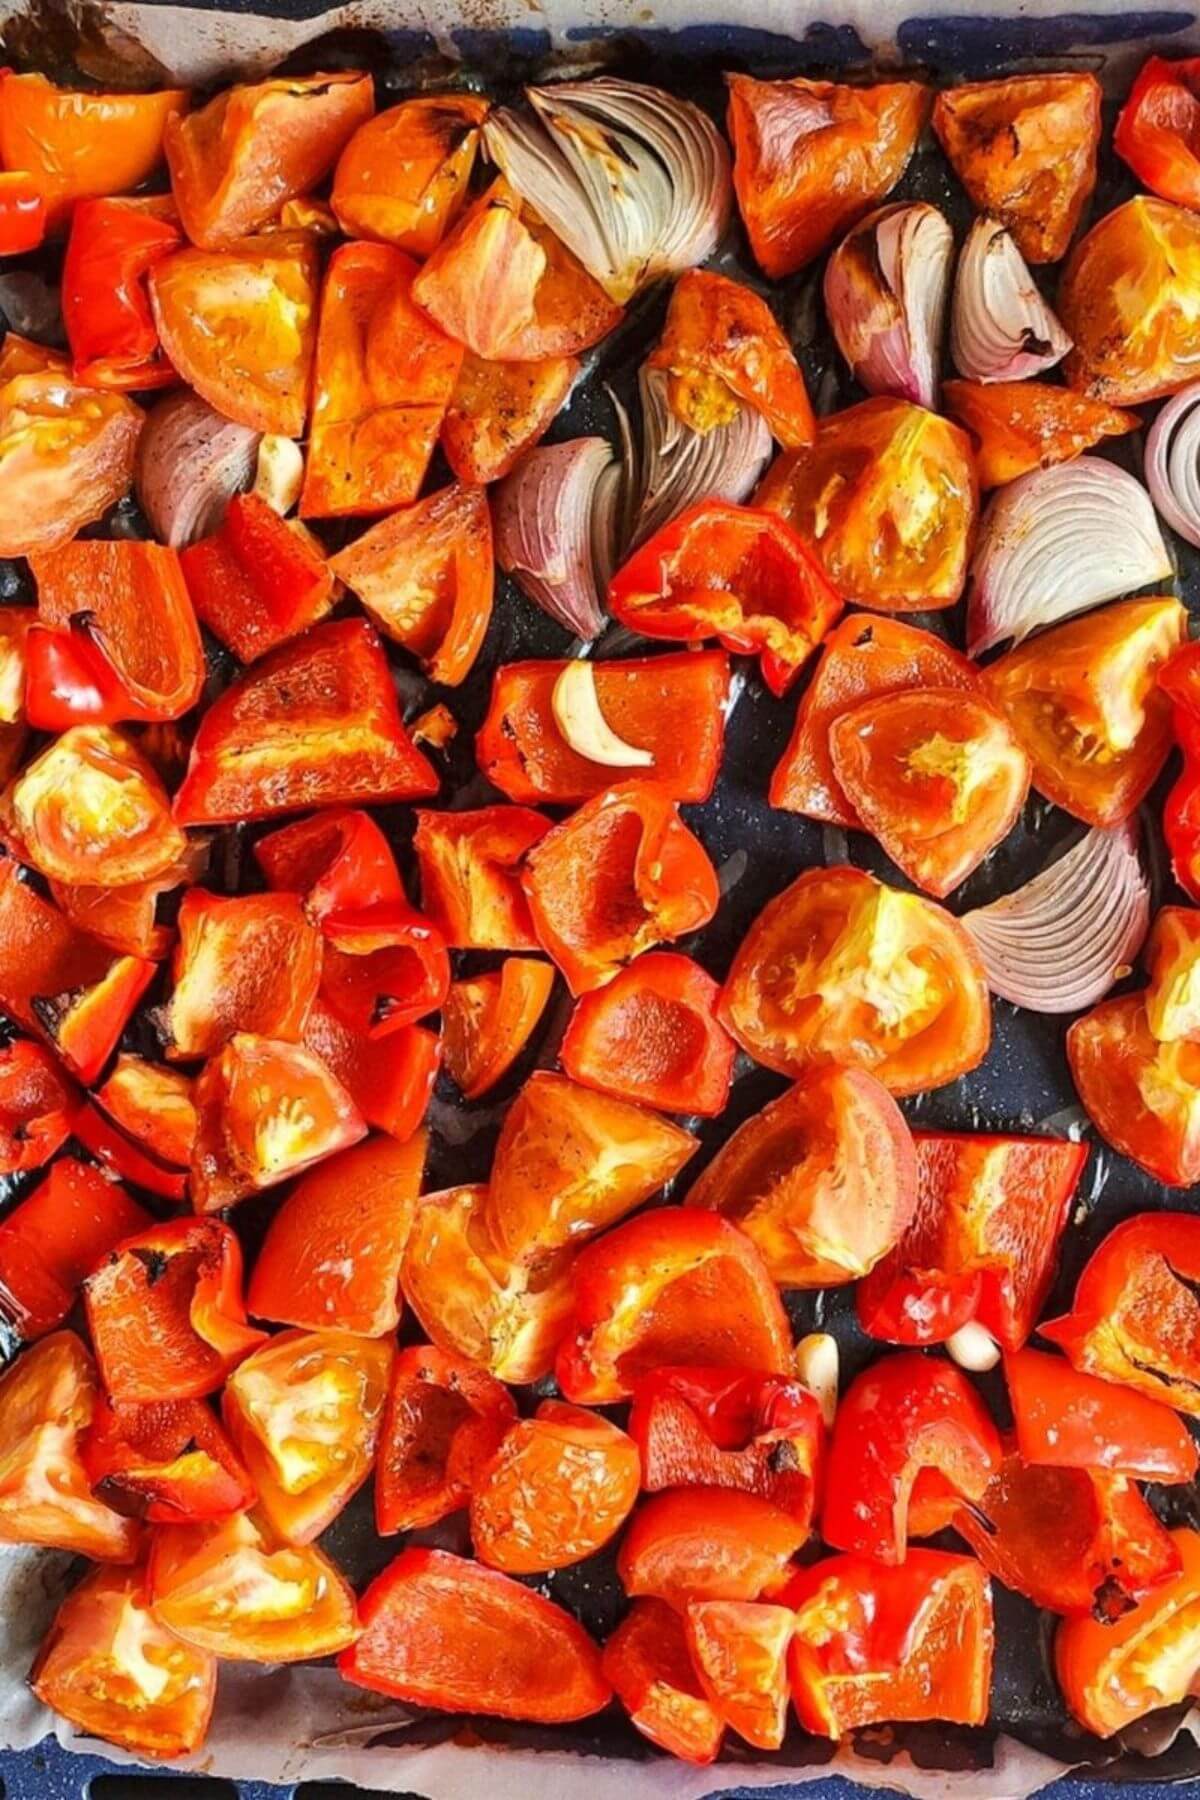 Roasted tomato, red bell pepper, onion, and garlic on a baking tray